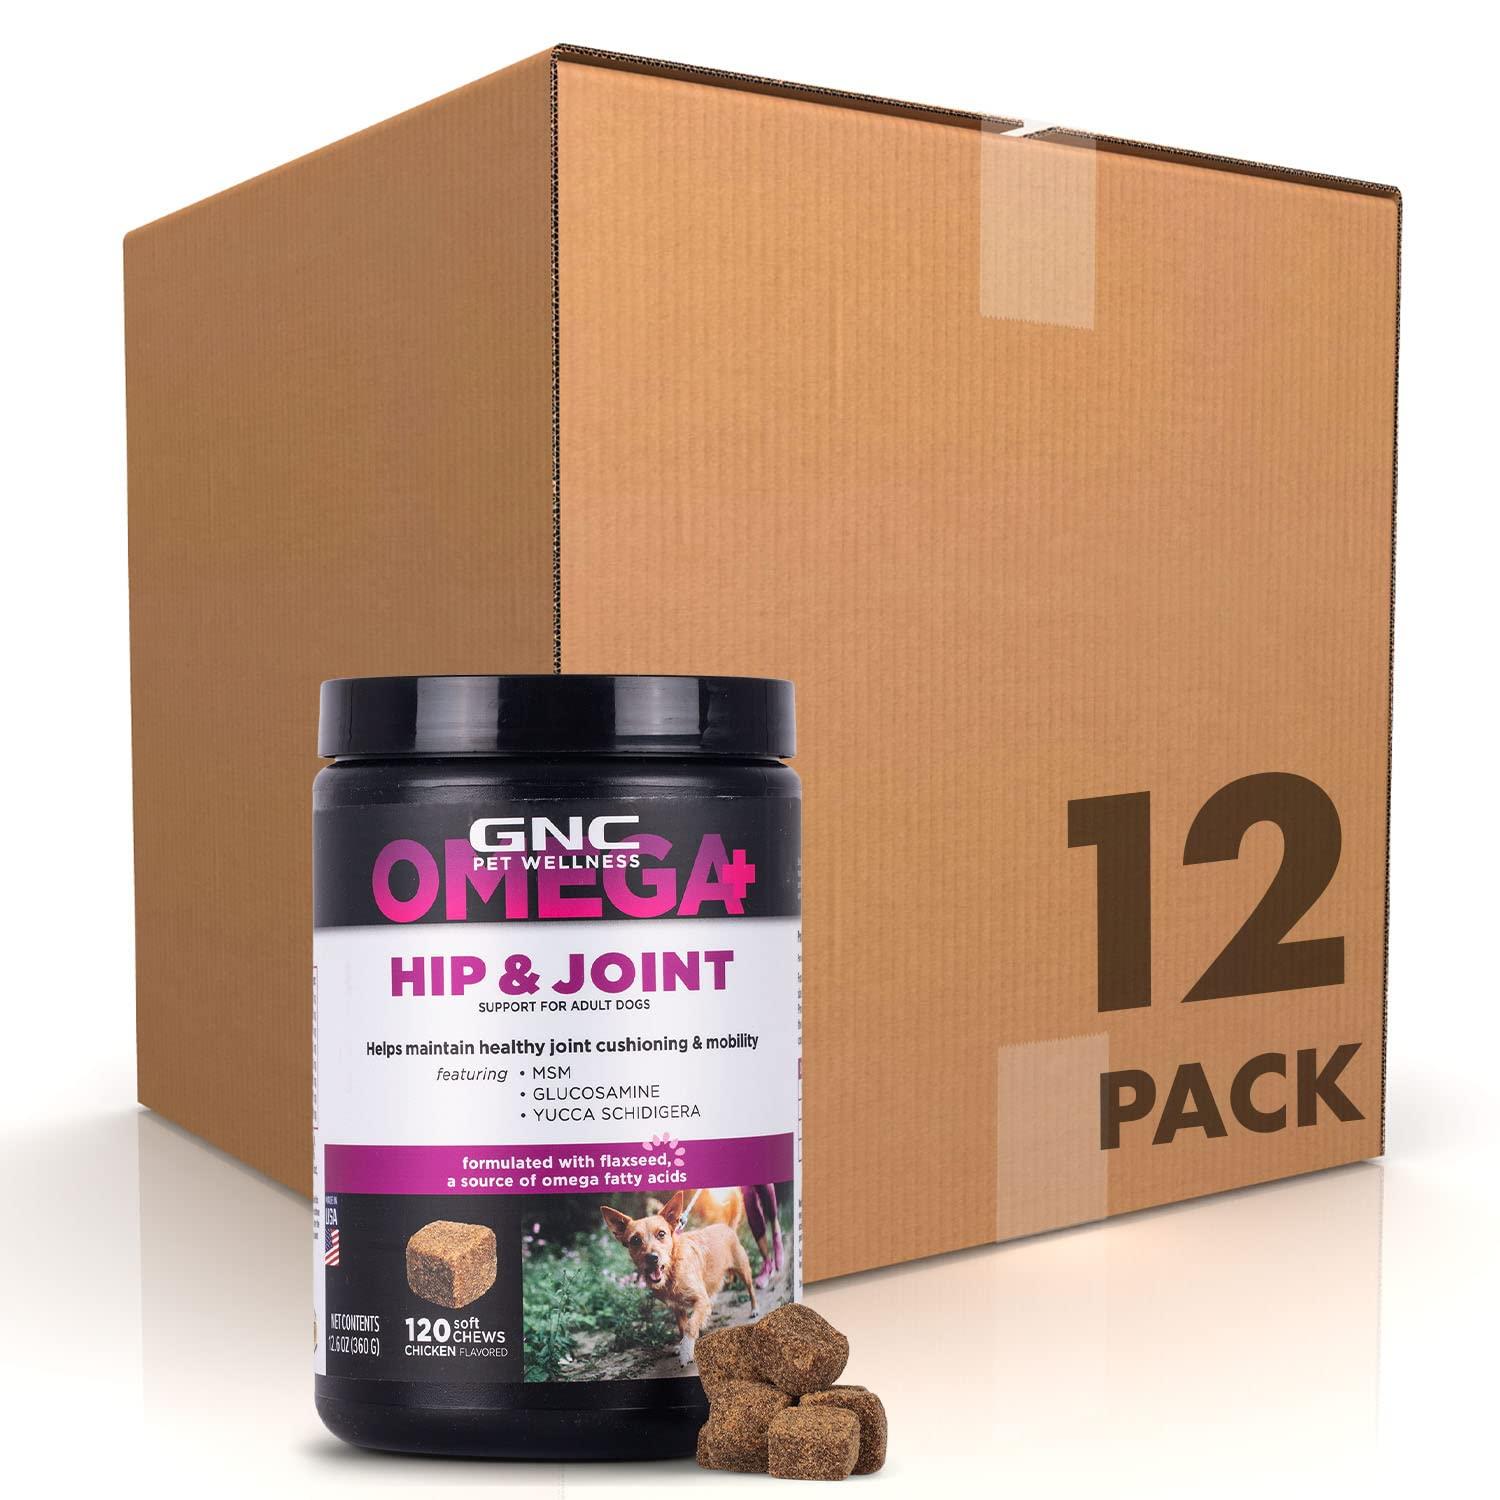 GNC Pets Omega Hip & Joint Dog Supplements for Adult Dogs Omega Fatty Acids & Flaxseed, 120 ct, 12 Pk | Chicken Soft Chew Hip and Joint Supplements MSM, Glucosamine, & Yucca Schidigera (FF15435PCS12)